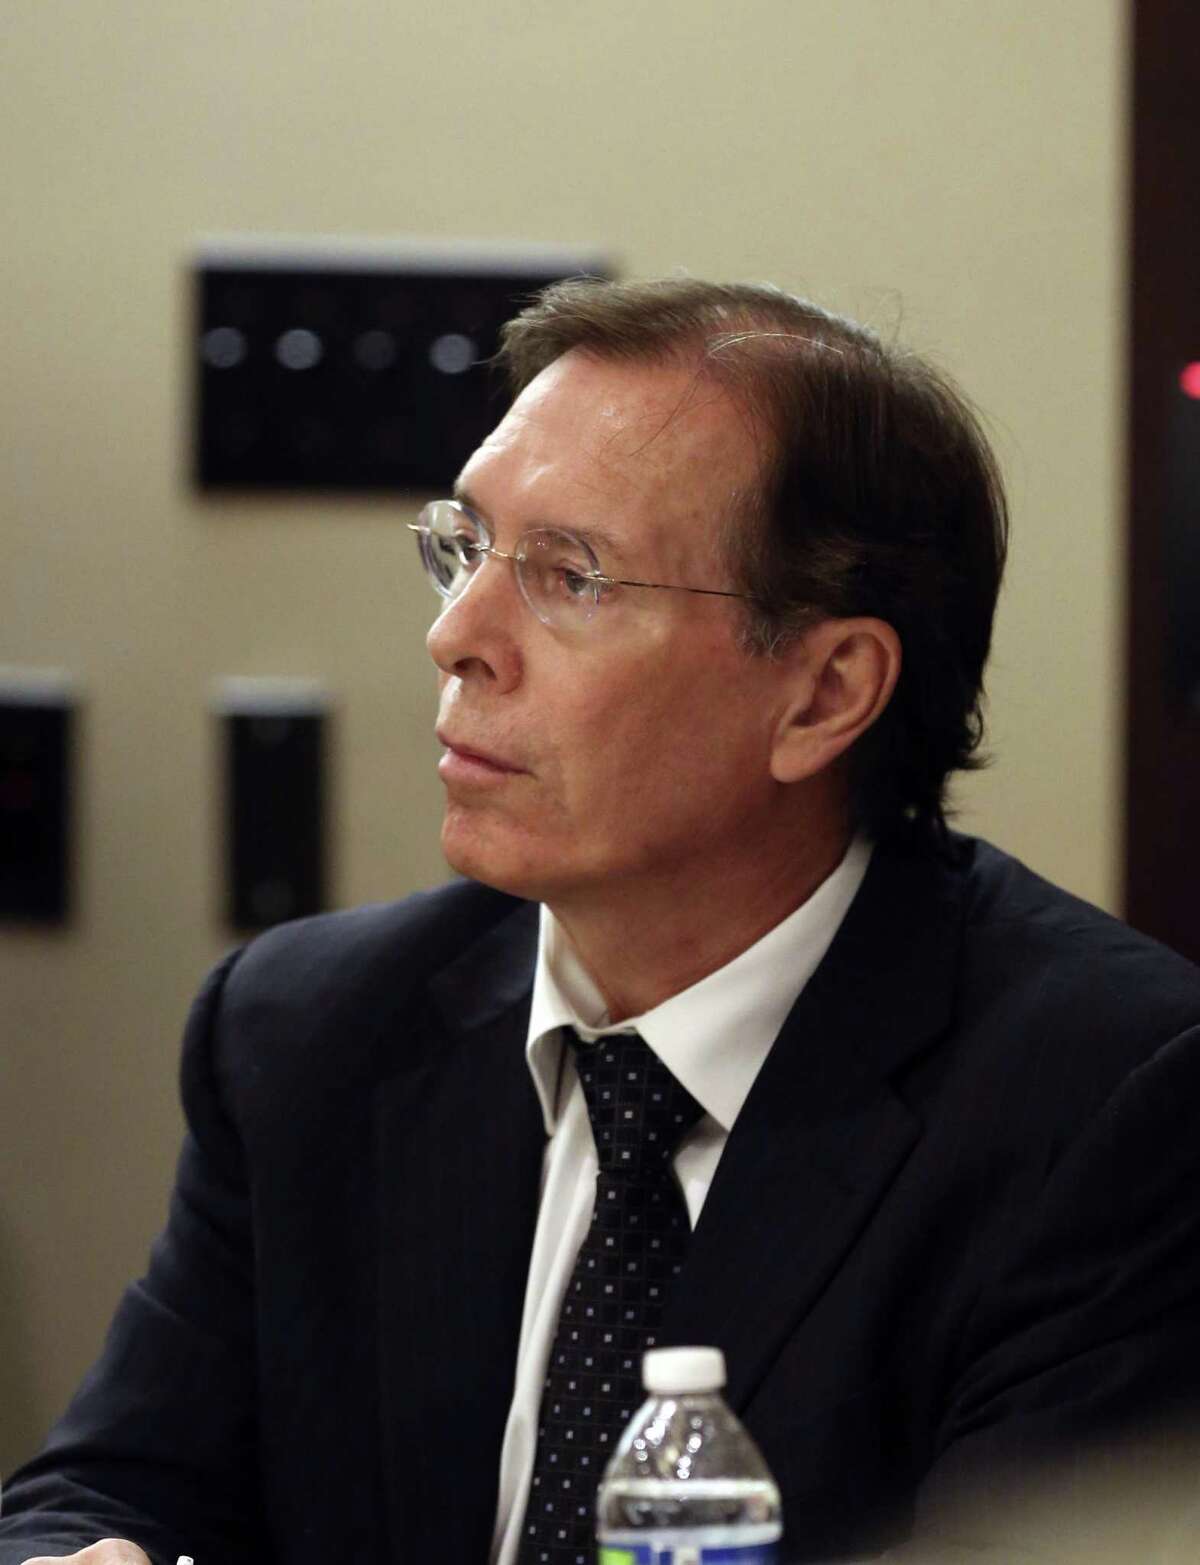 Dr. Calvin Day after his 2013 conviction of sexually assaulting a patient. With that criminal conviction overturned and the criminal and civil cases against him dismissed, the Texas Medical Board on Tuesday cleared him of complaints from former patients, allowing him to practice medicine again.